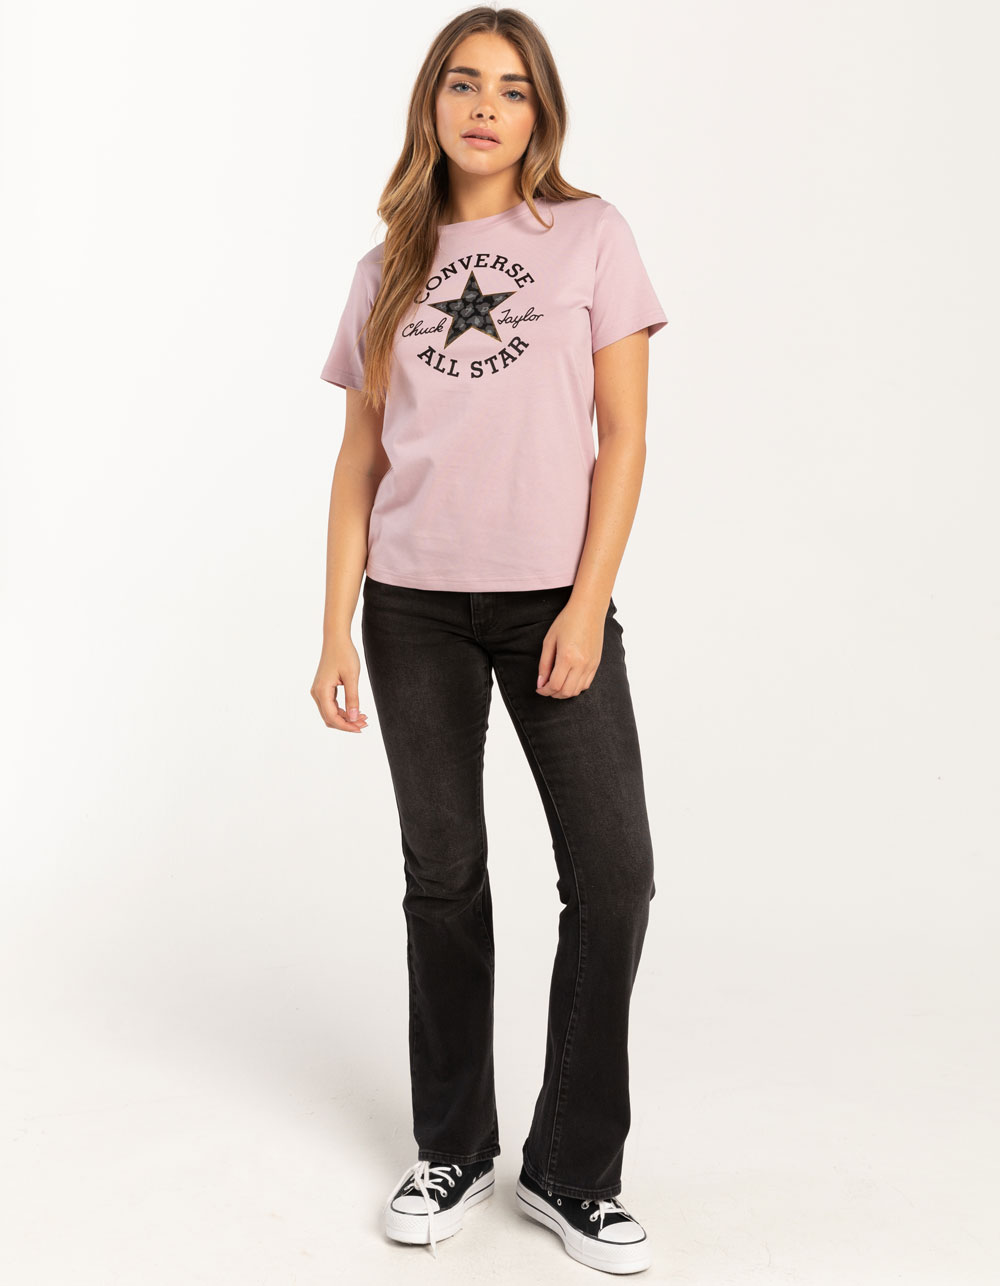 CONVERSE Chuck Taylor All Star Patch Womens Tee - VIOLET | Tillys